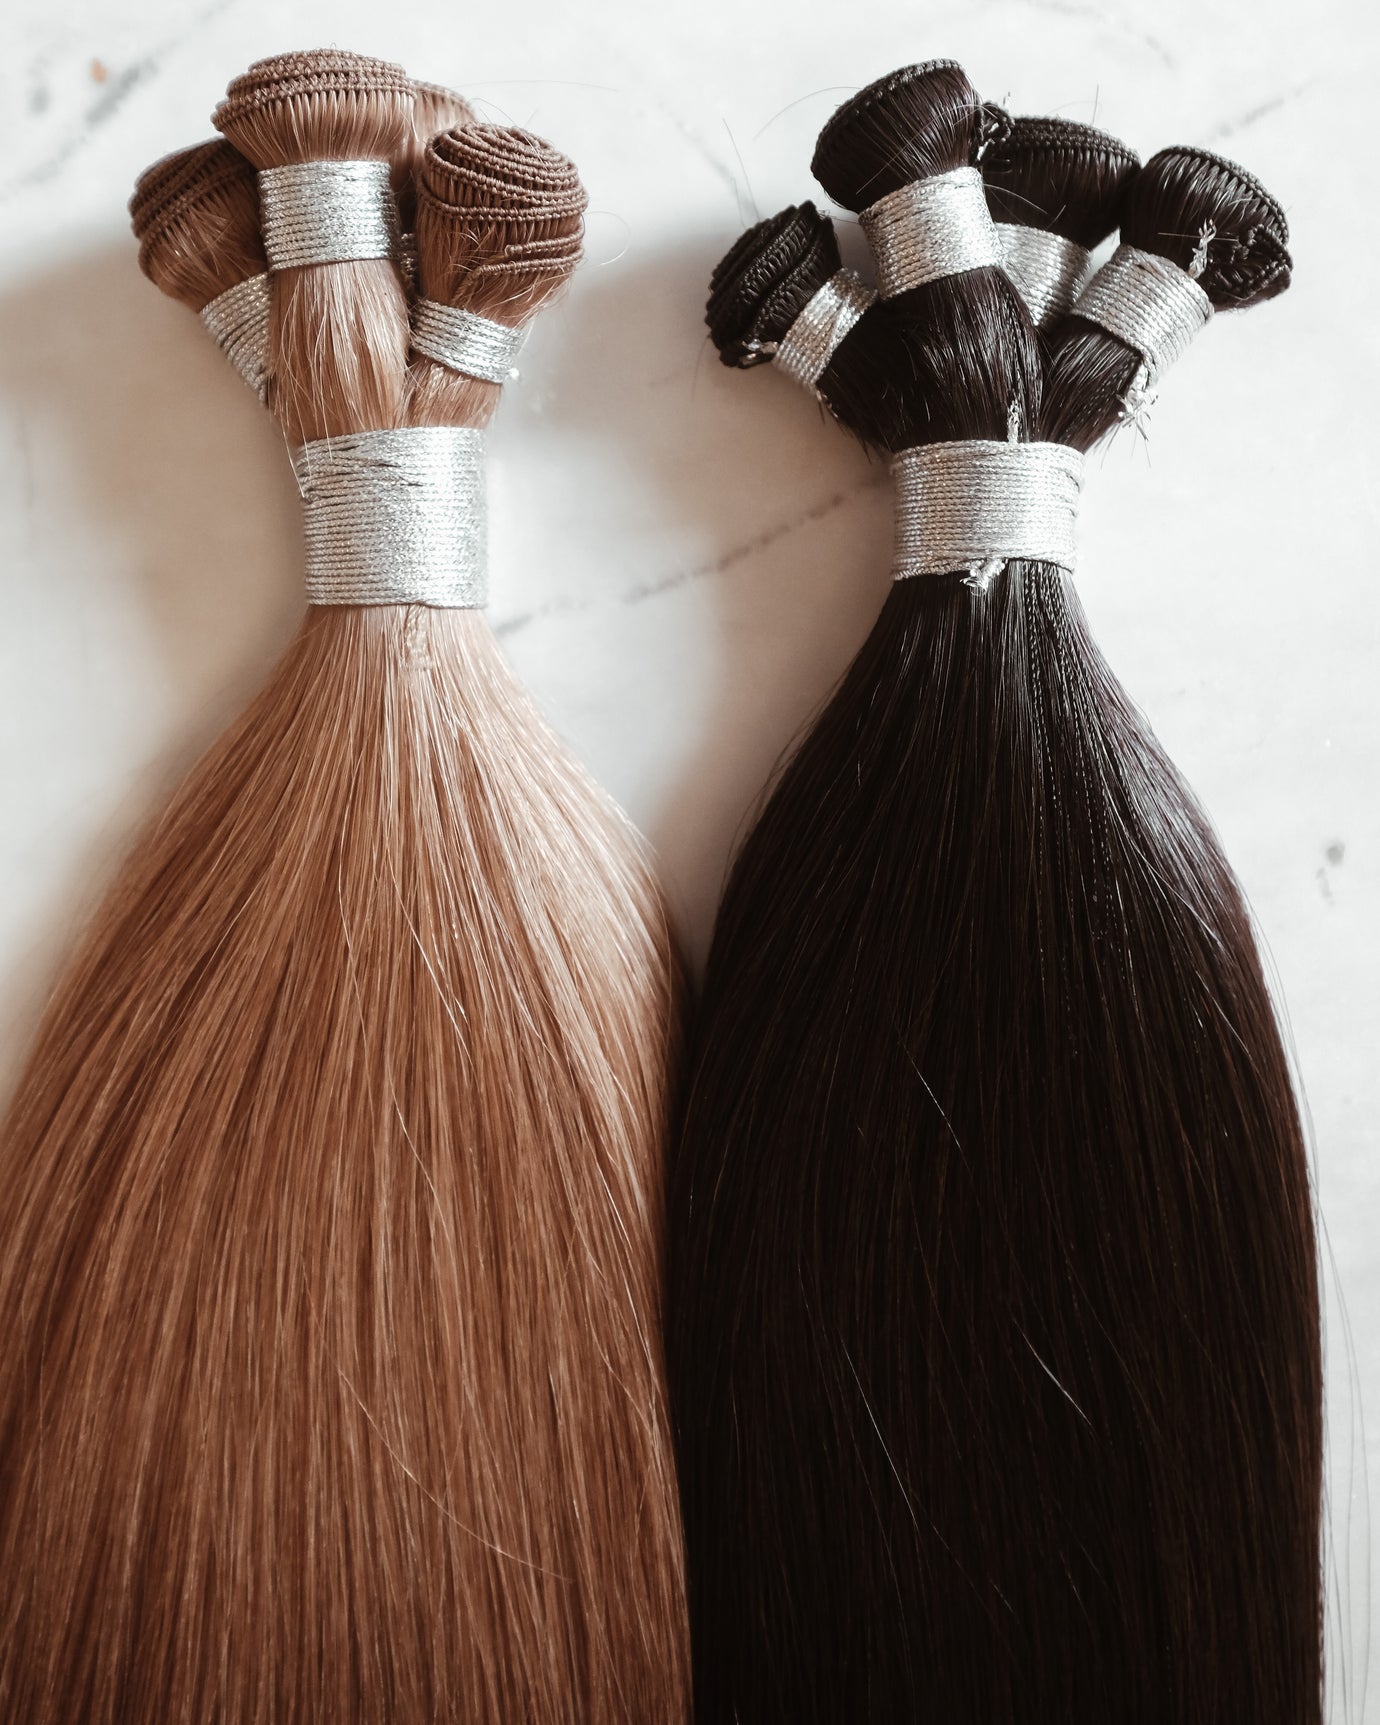 Common Questions About Hand-Tied Hair Extensions